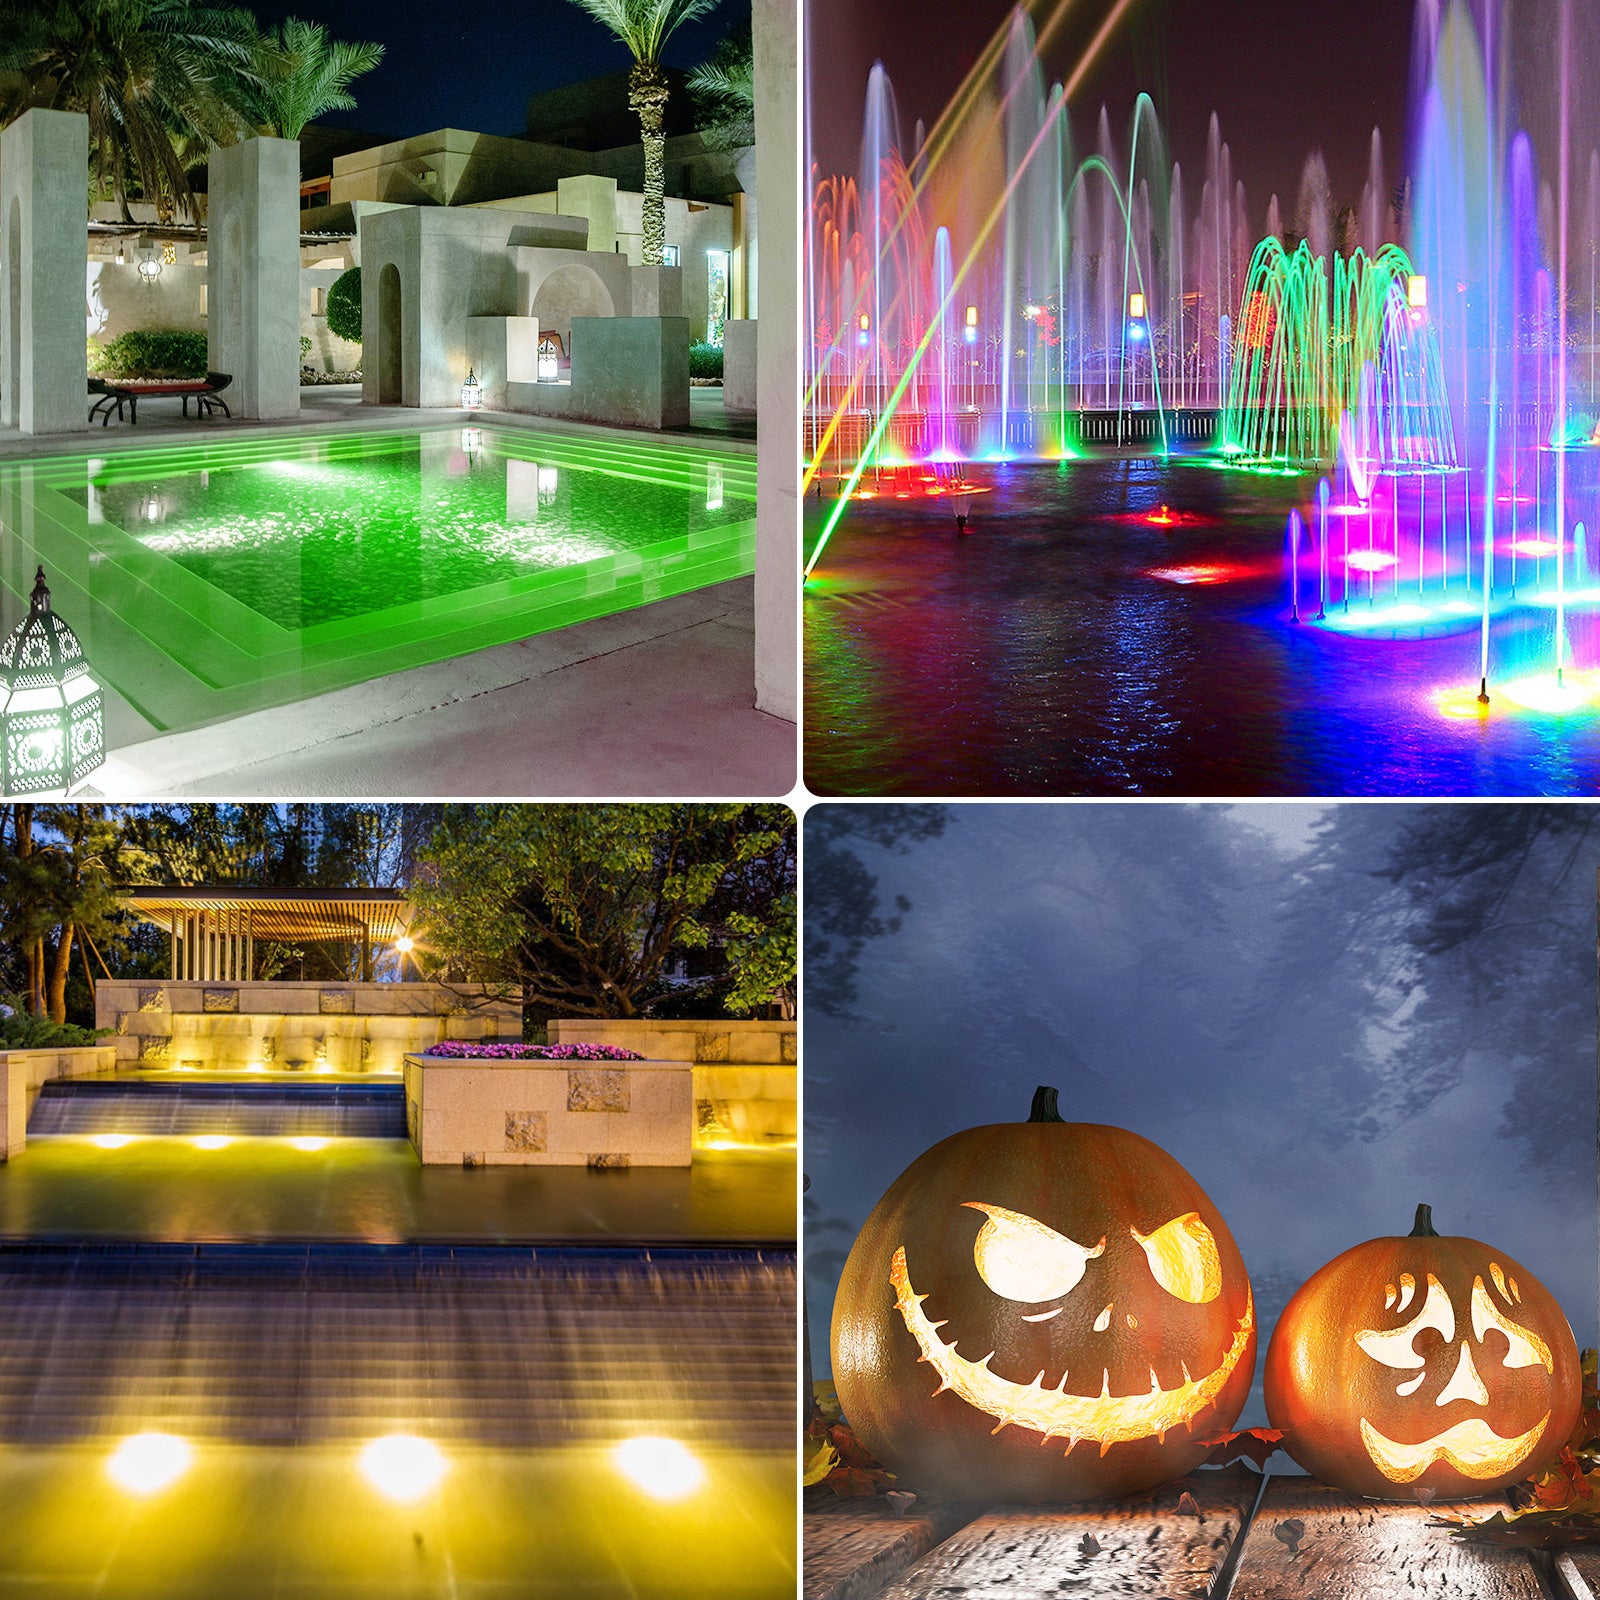 Upgraded RGB LED Submersible Pool Light has widely application, can be pool and yard decor, also for  pumpkin decor